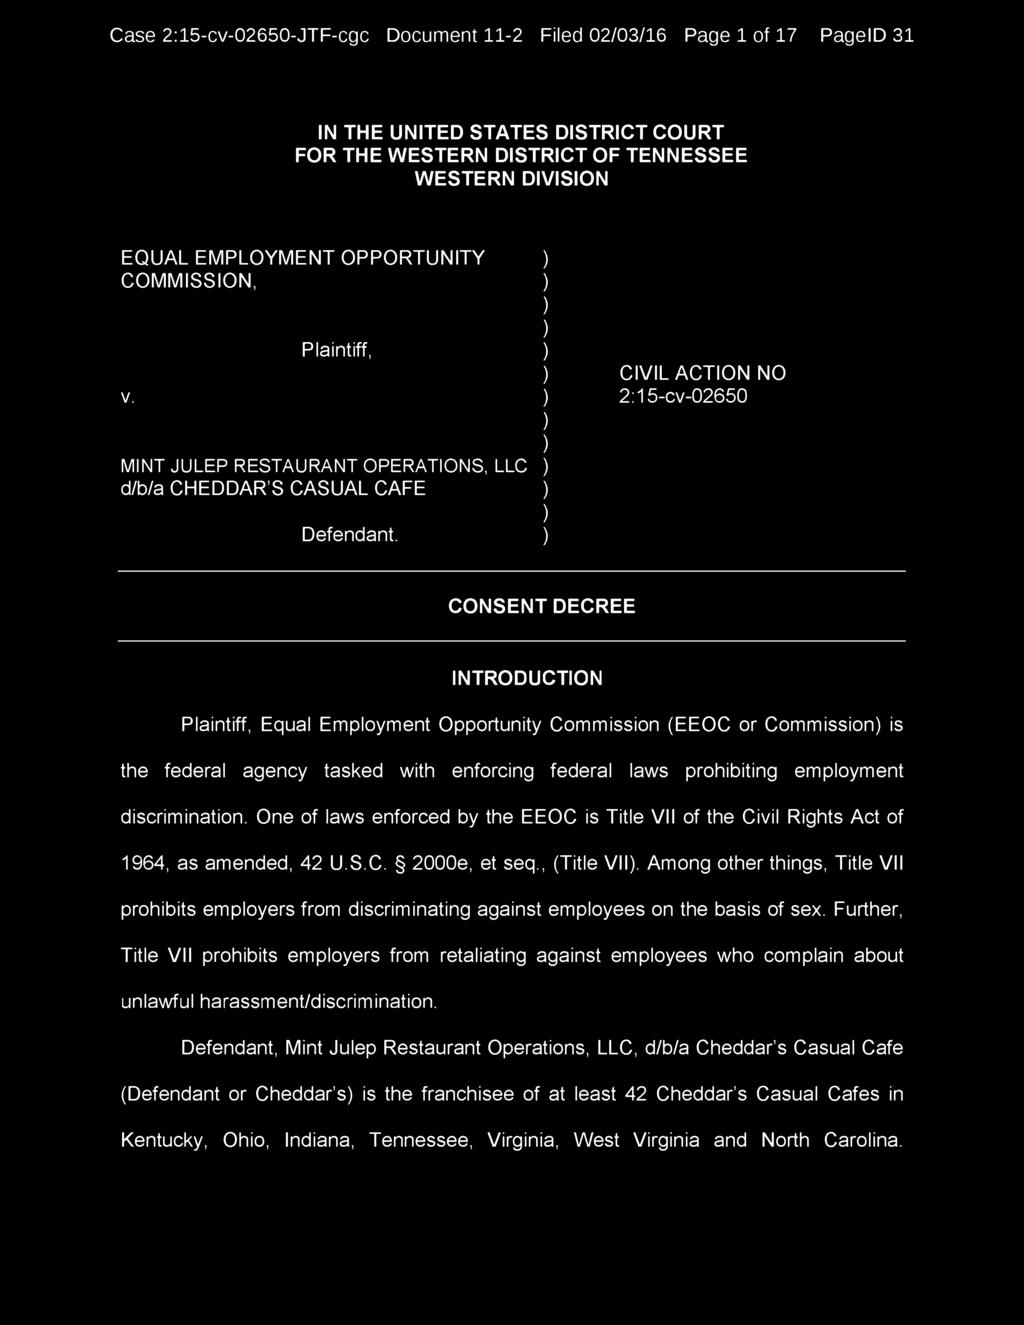 Case 2:15-cv-02650-JTF-cgc Document 11-2 Filed 02/03/16 Page 1 of 17 PagelD 31 IN THE UNITED STATES DISTRICT COURT FOR THE WESTERN DISTRICT OF TENNESSEE WESTERN DIVISION EQUAL EMPLOYMENT OPPORTUNITY